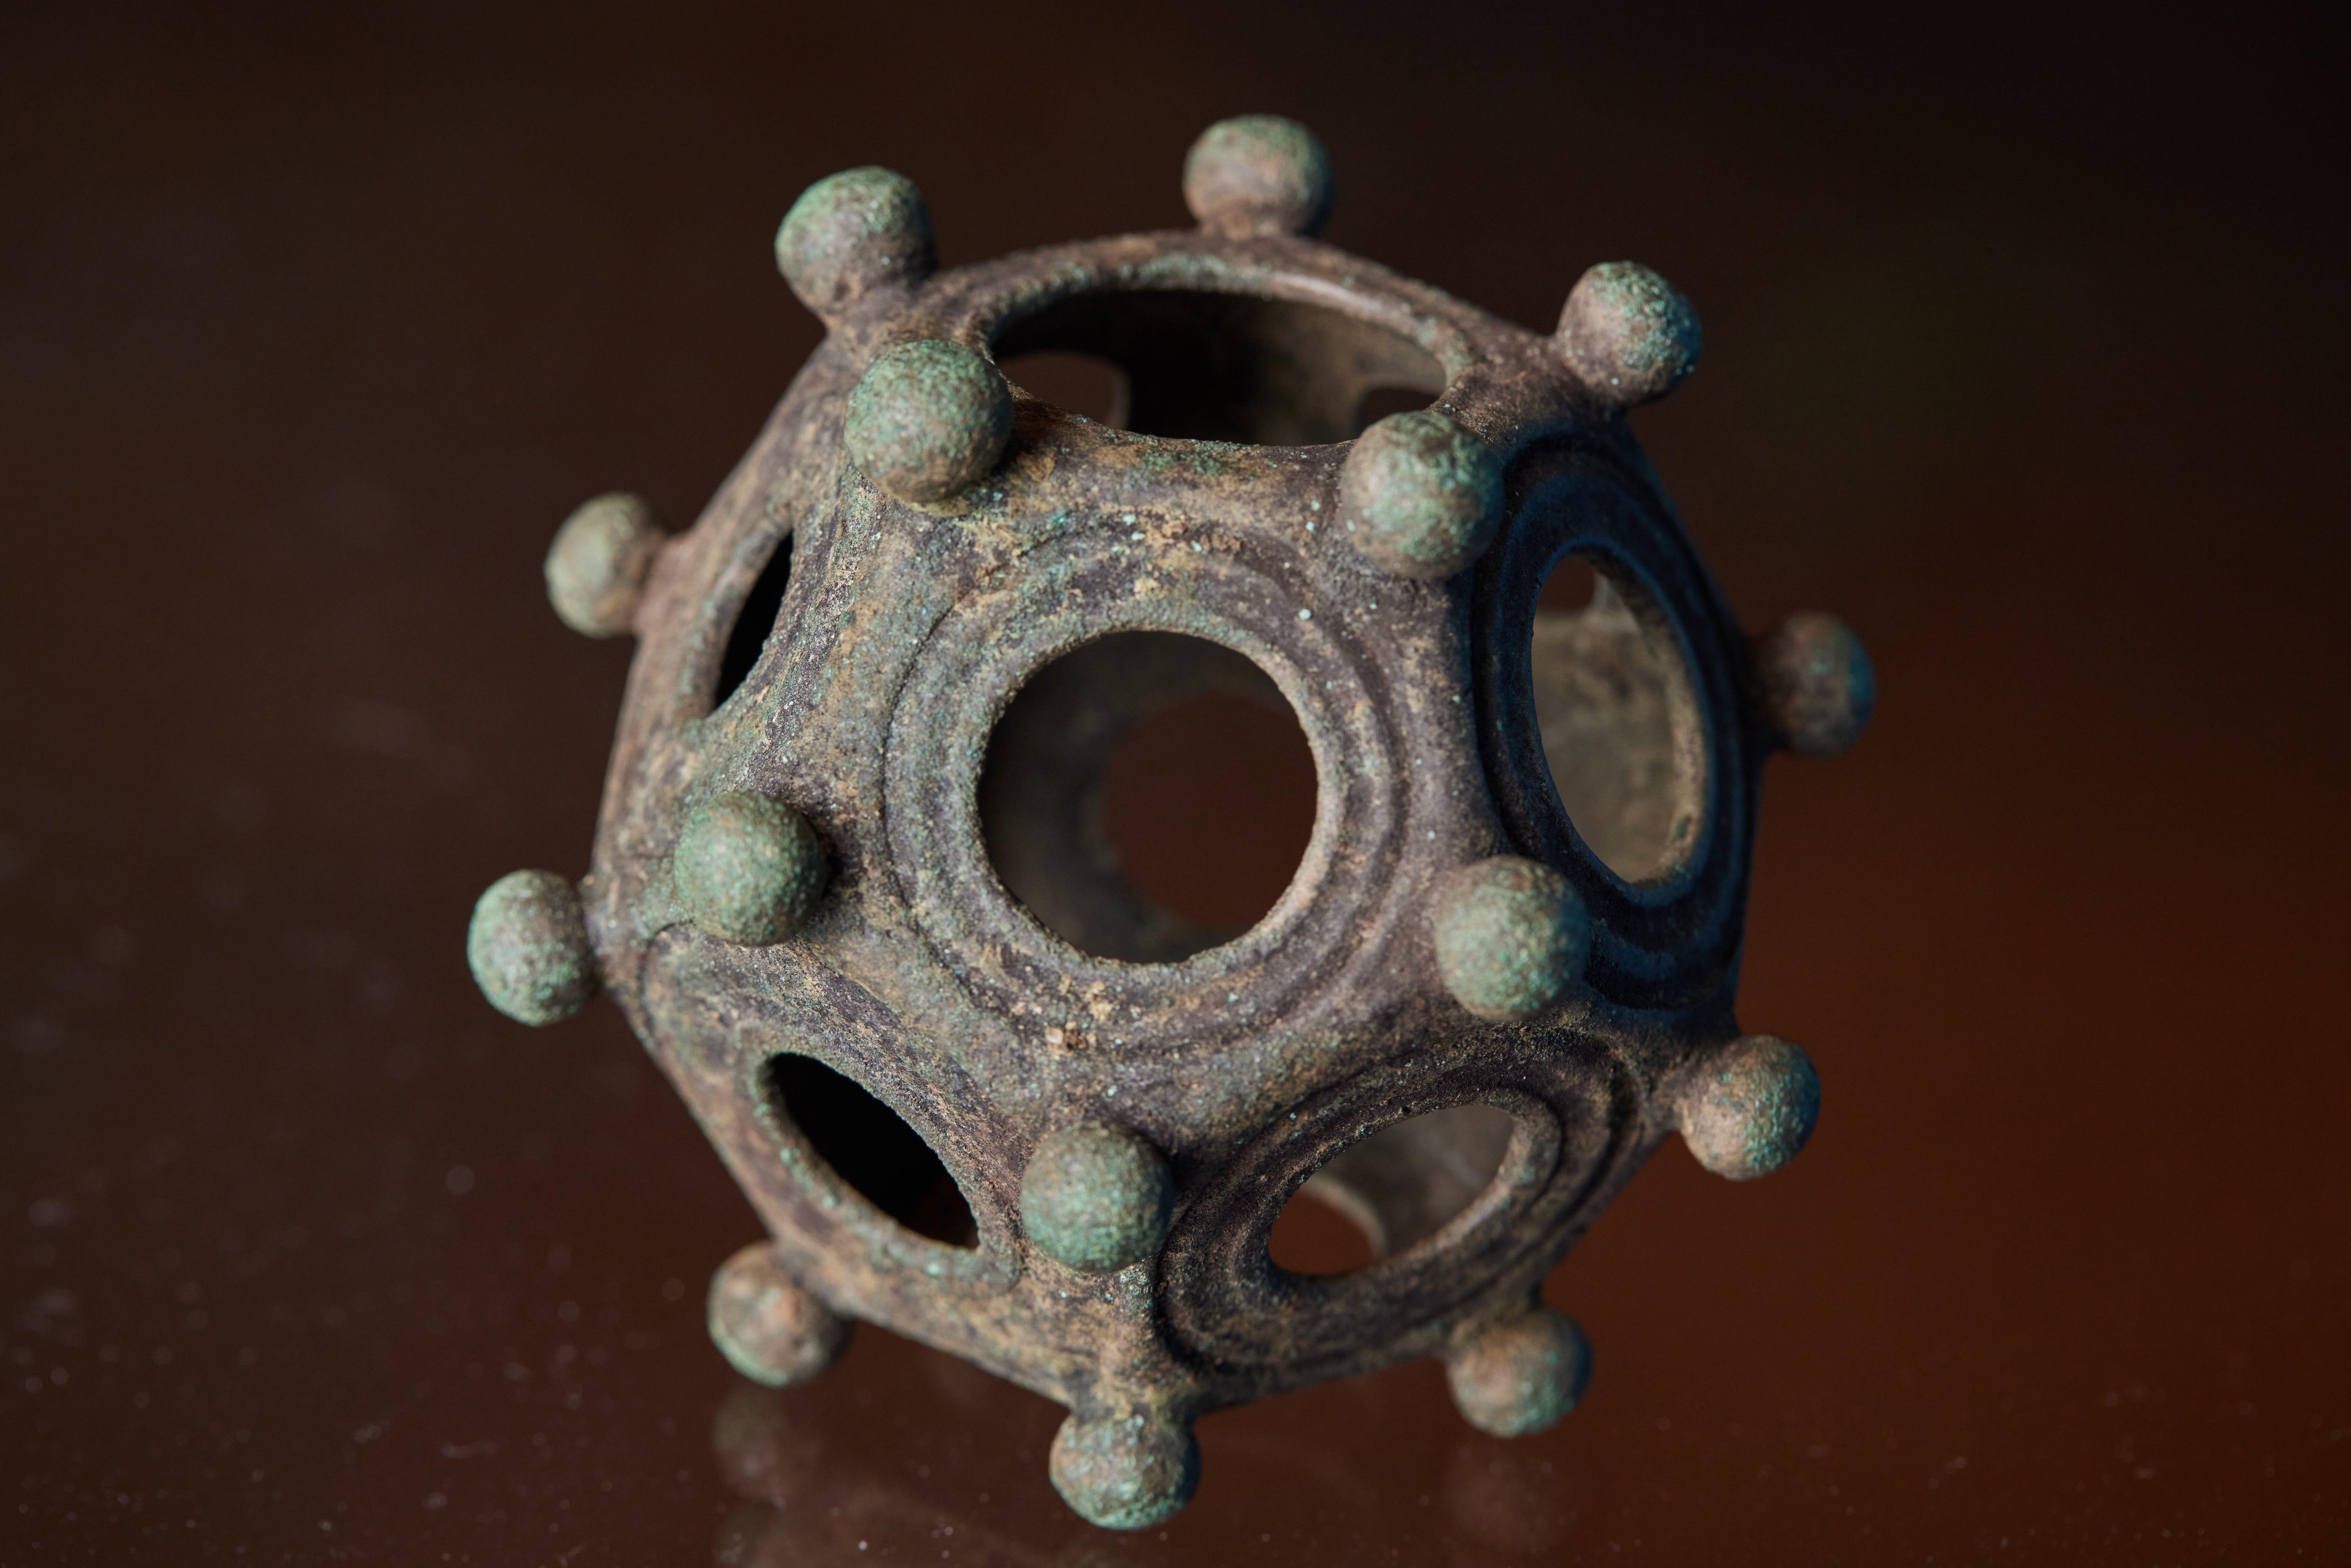 Metal dodecahedra featuring a number of round holes, with knobs framing the holes - a 12-sided, hollow object with knobs.